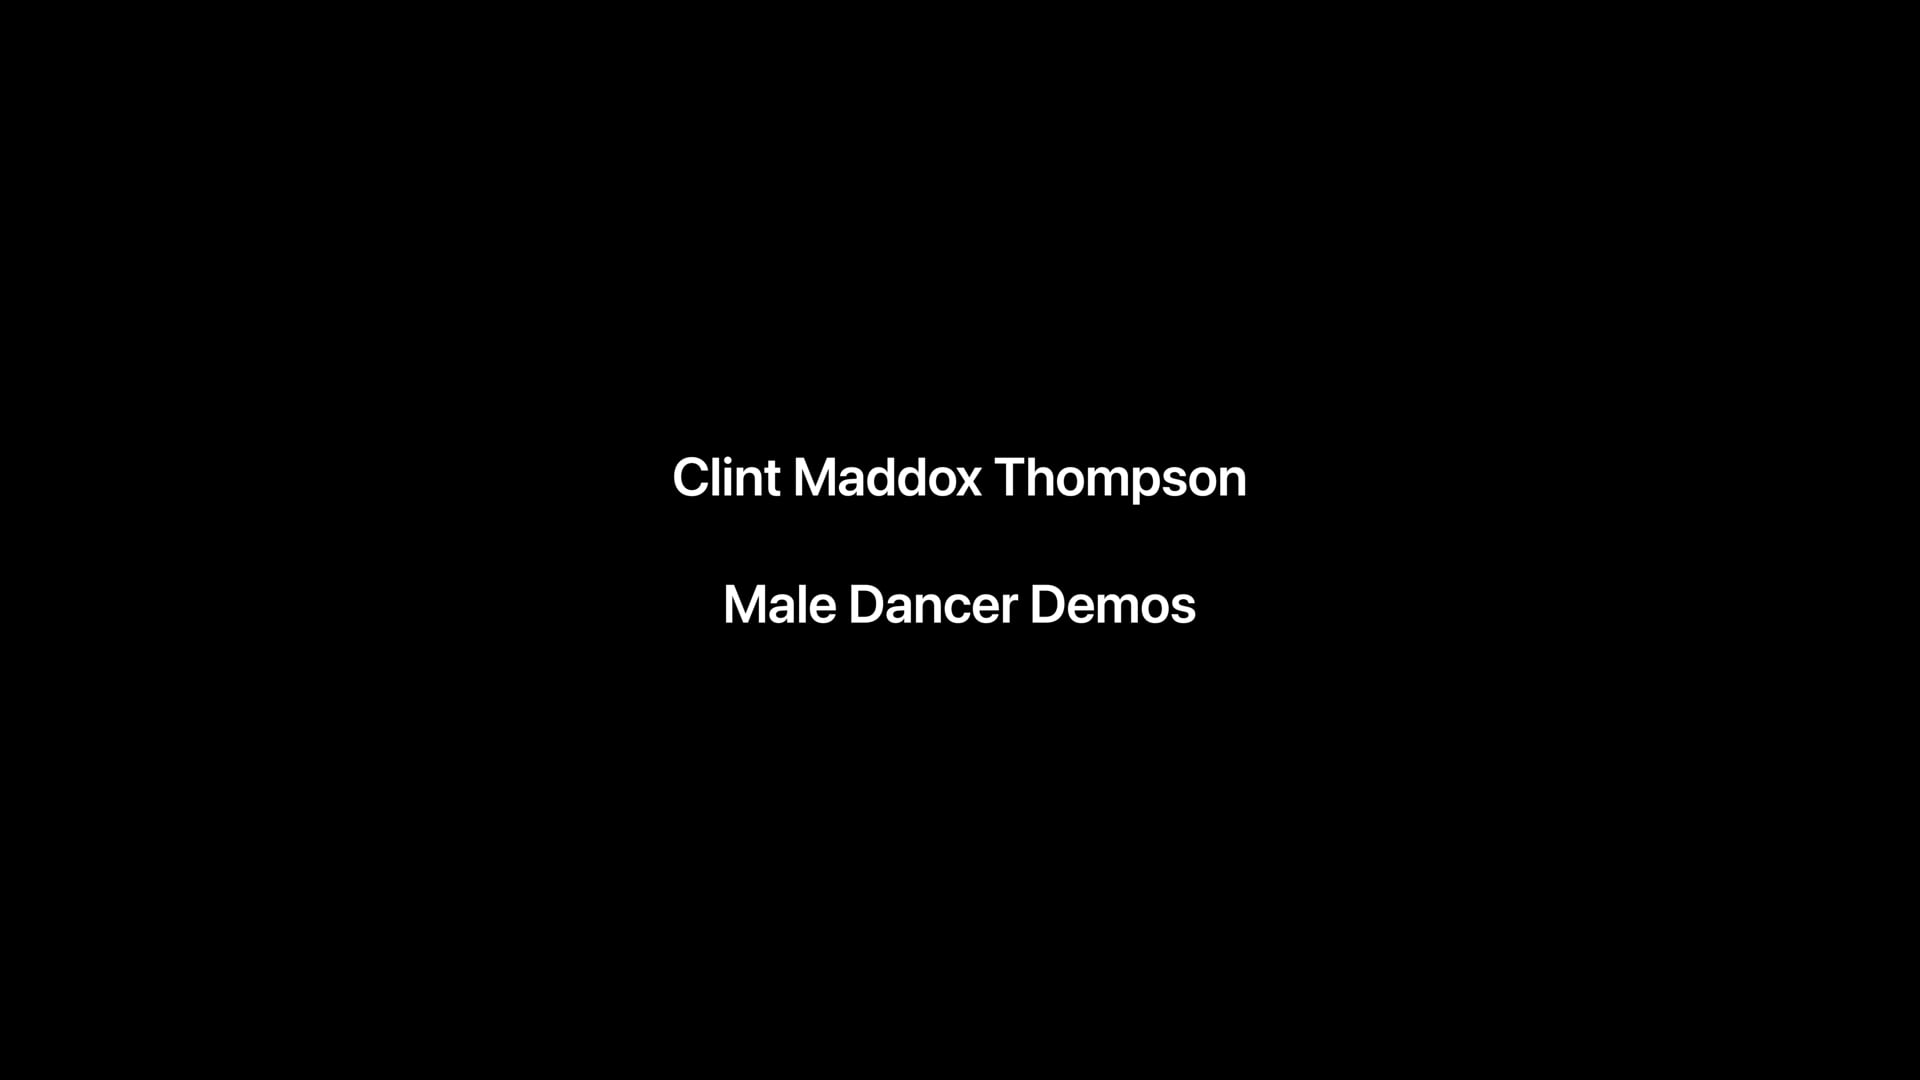 Promotional video thumbnail 1 for Clint Maddox Thompson